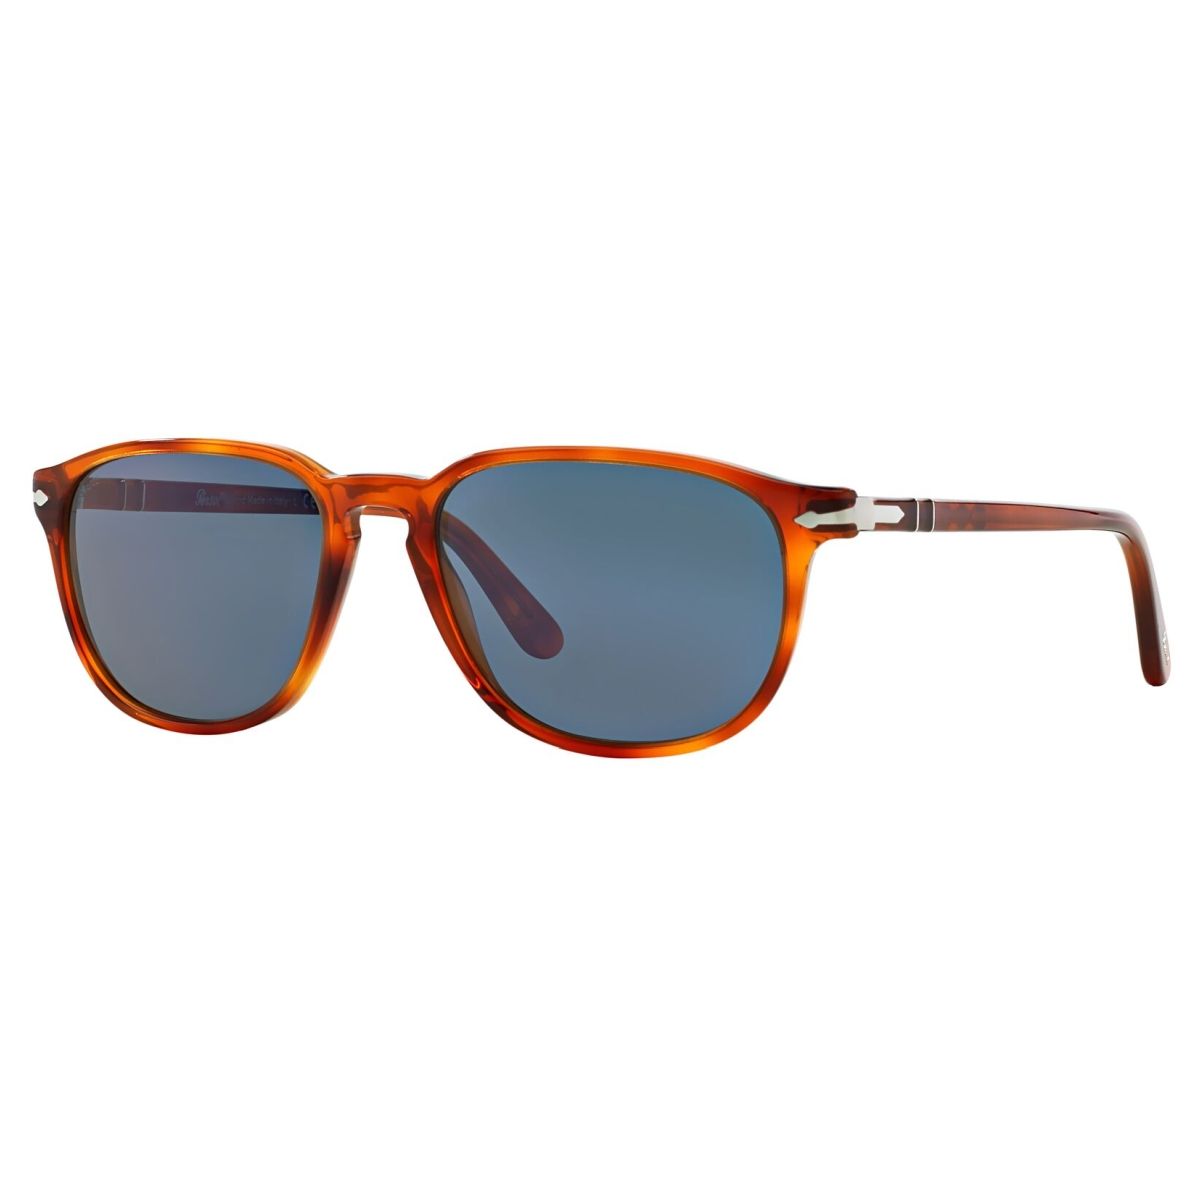 PERSOL 3019S/96/56/52